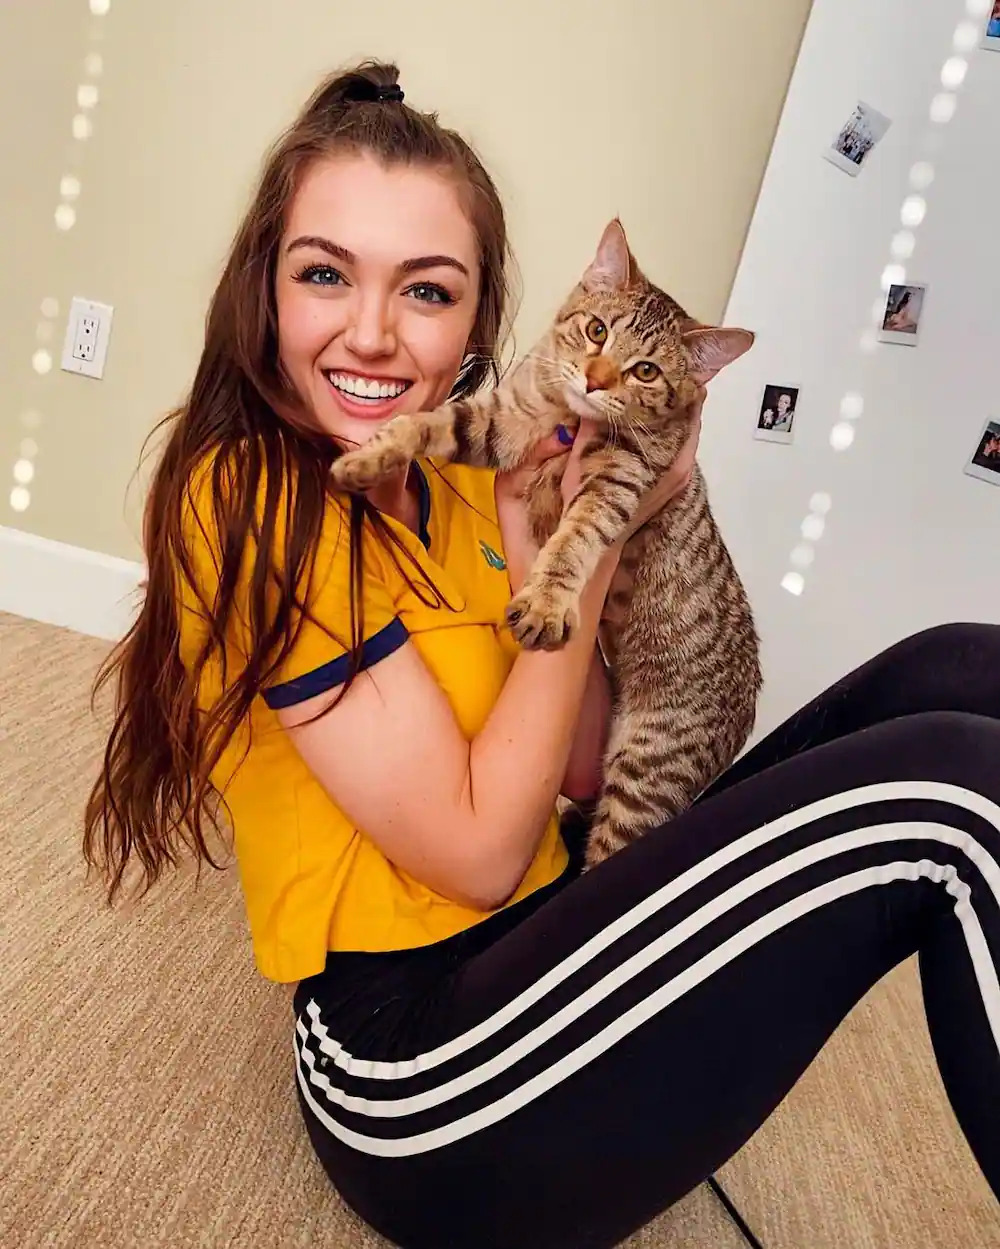 Ally Hardesty Patreon - An Overview Of The Influencer's Life, Career, And Net Worth